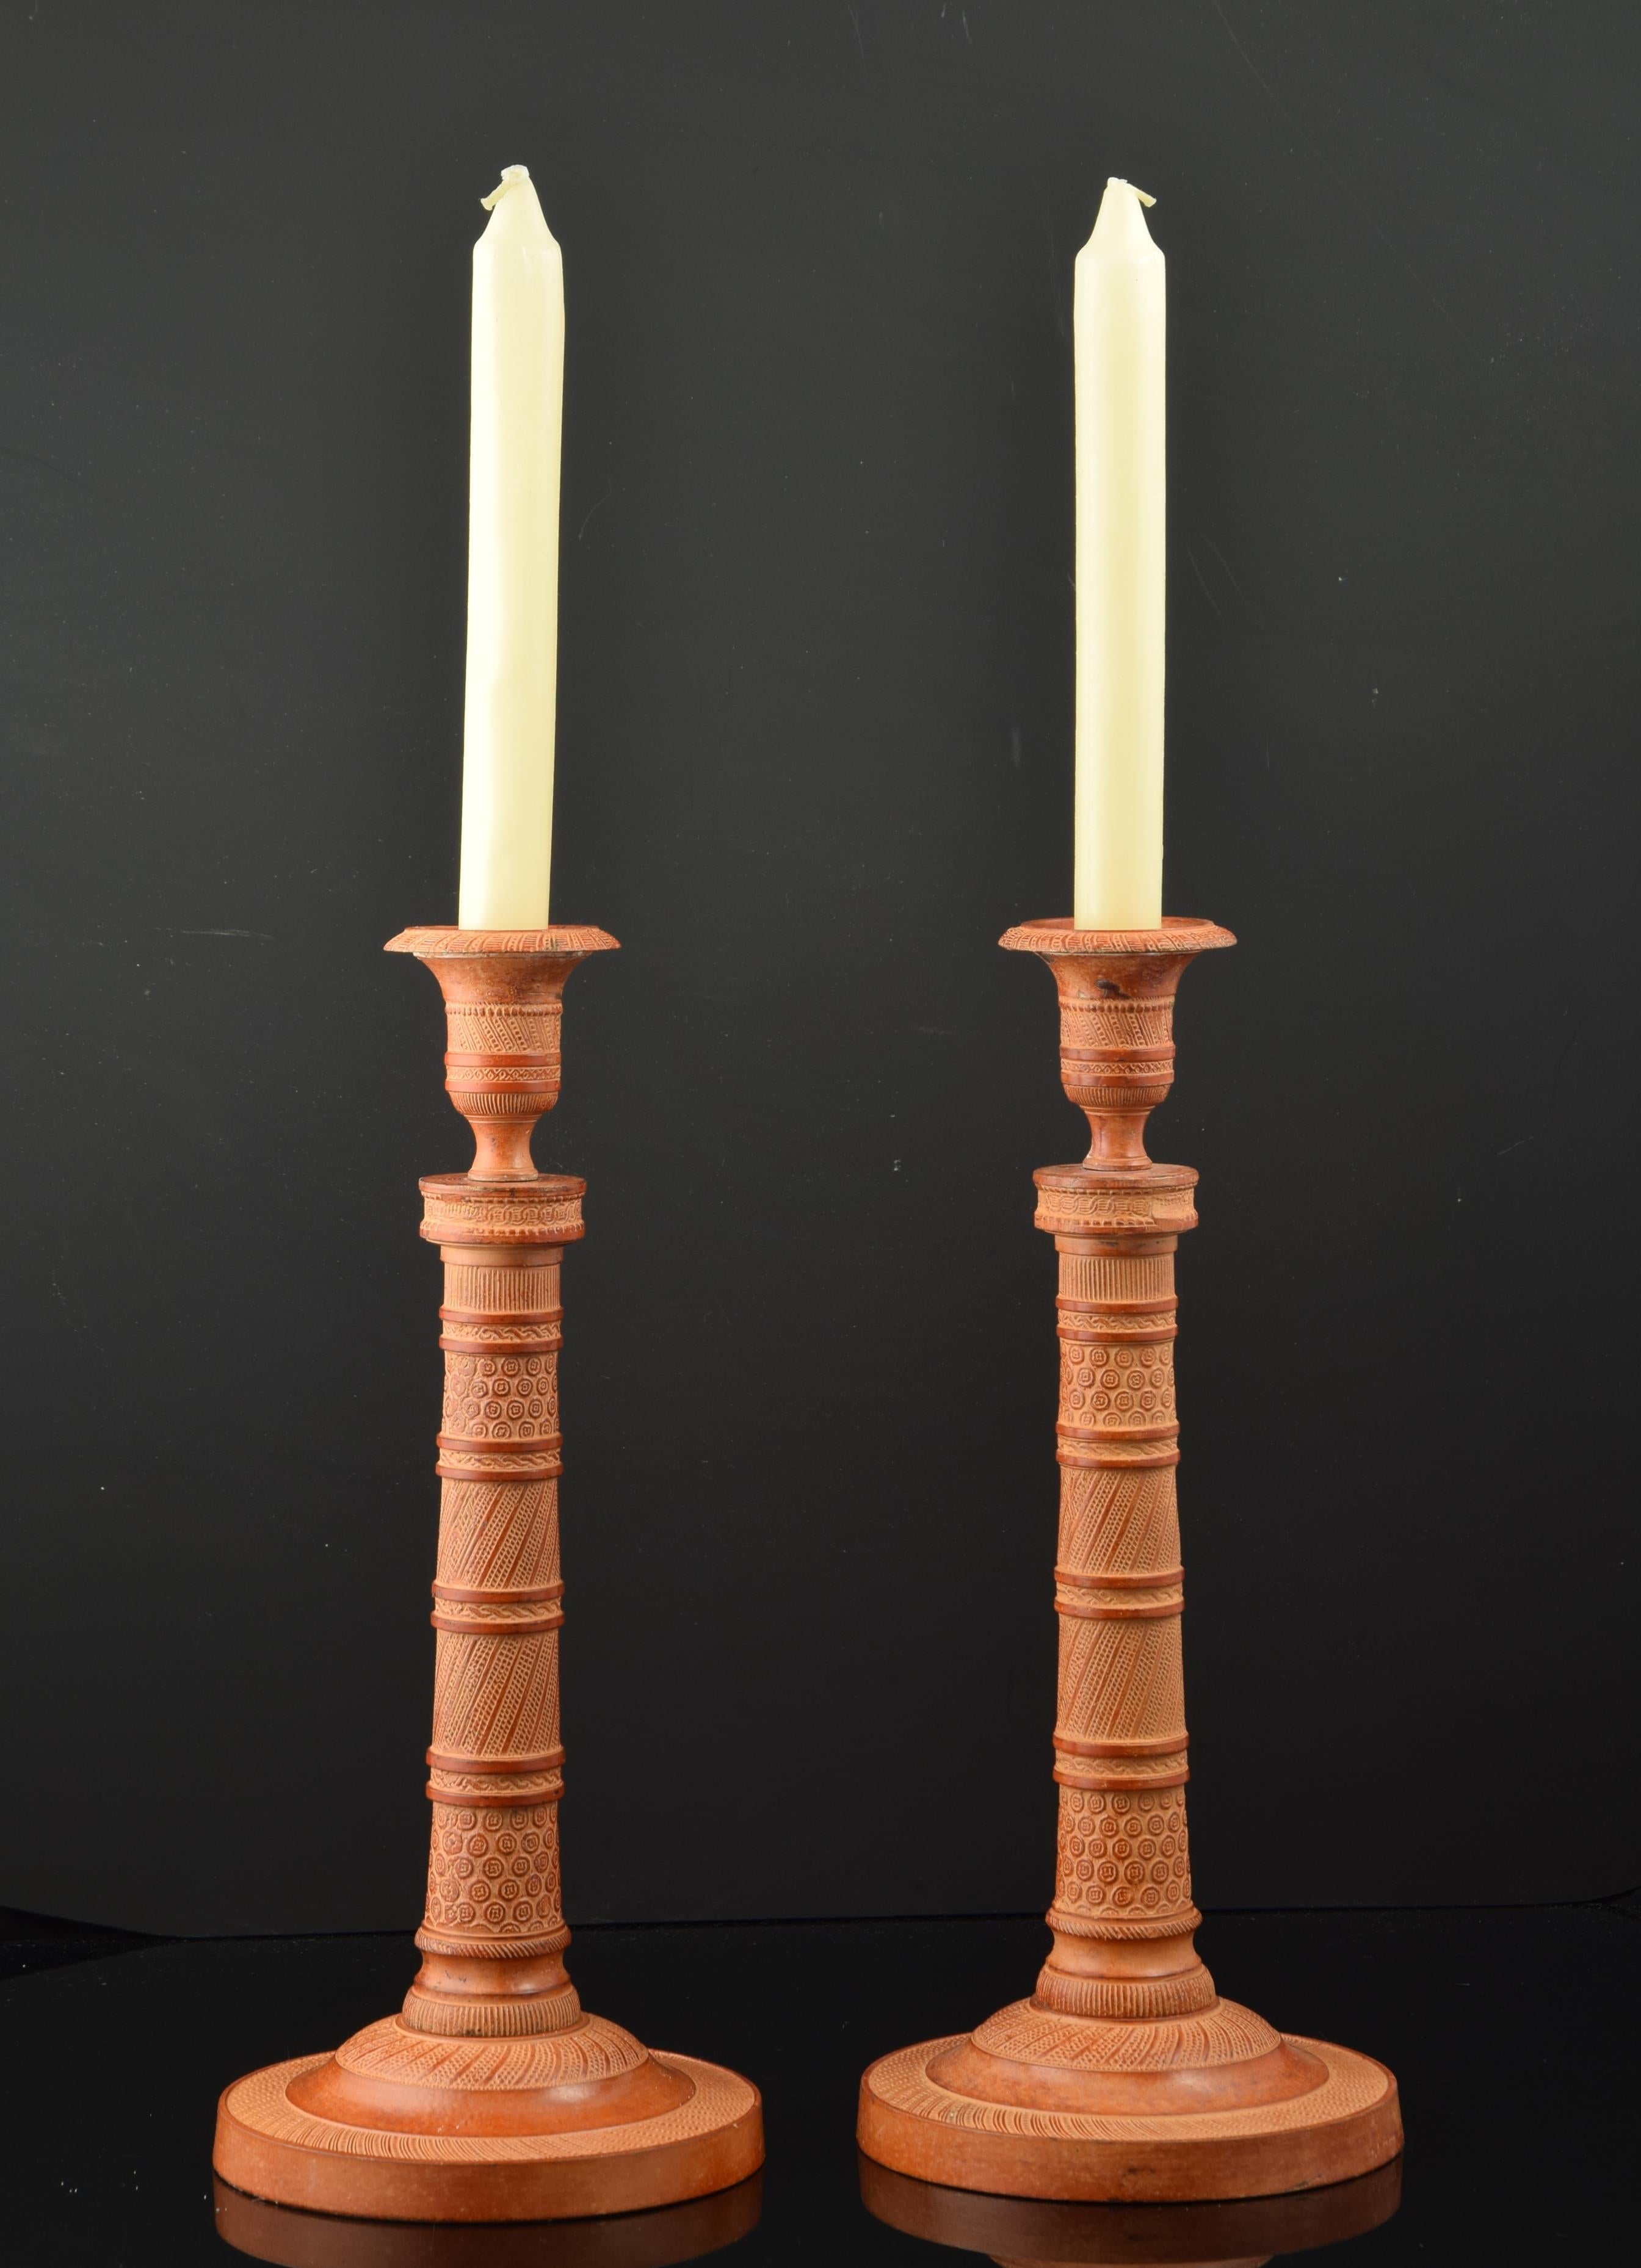 Pair of candlesticks in patinated bronze.
Single-light candleholder with circular base, cylindrical barrel and container for the candle in the shape of a classic vase. The entire surface is decorated based on moldings separated by straight bands